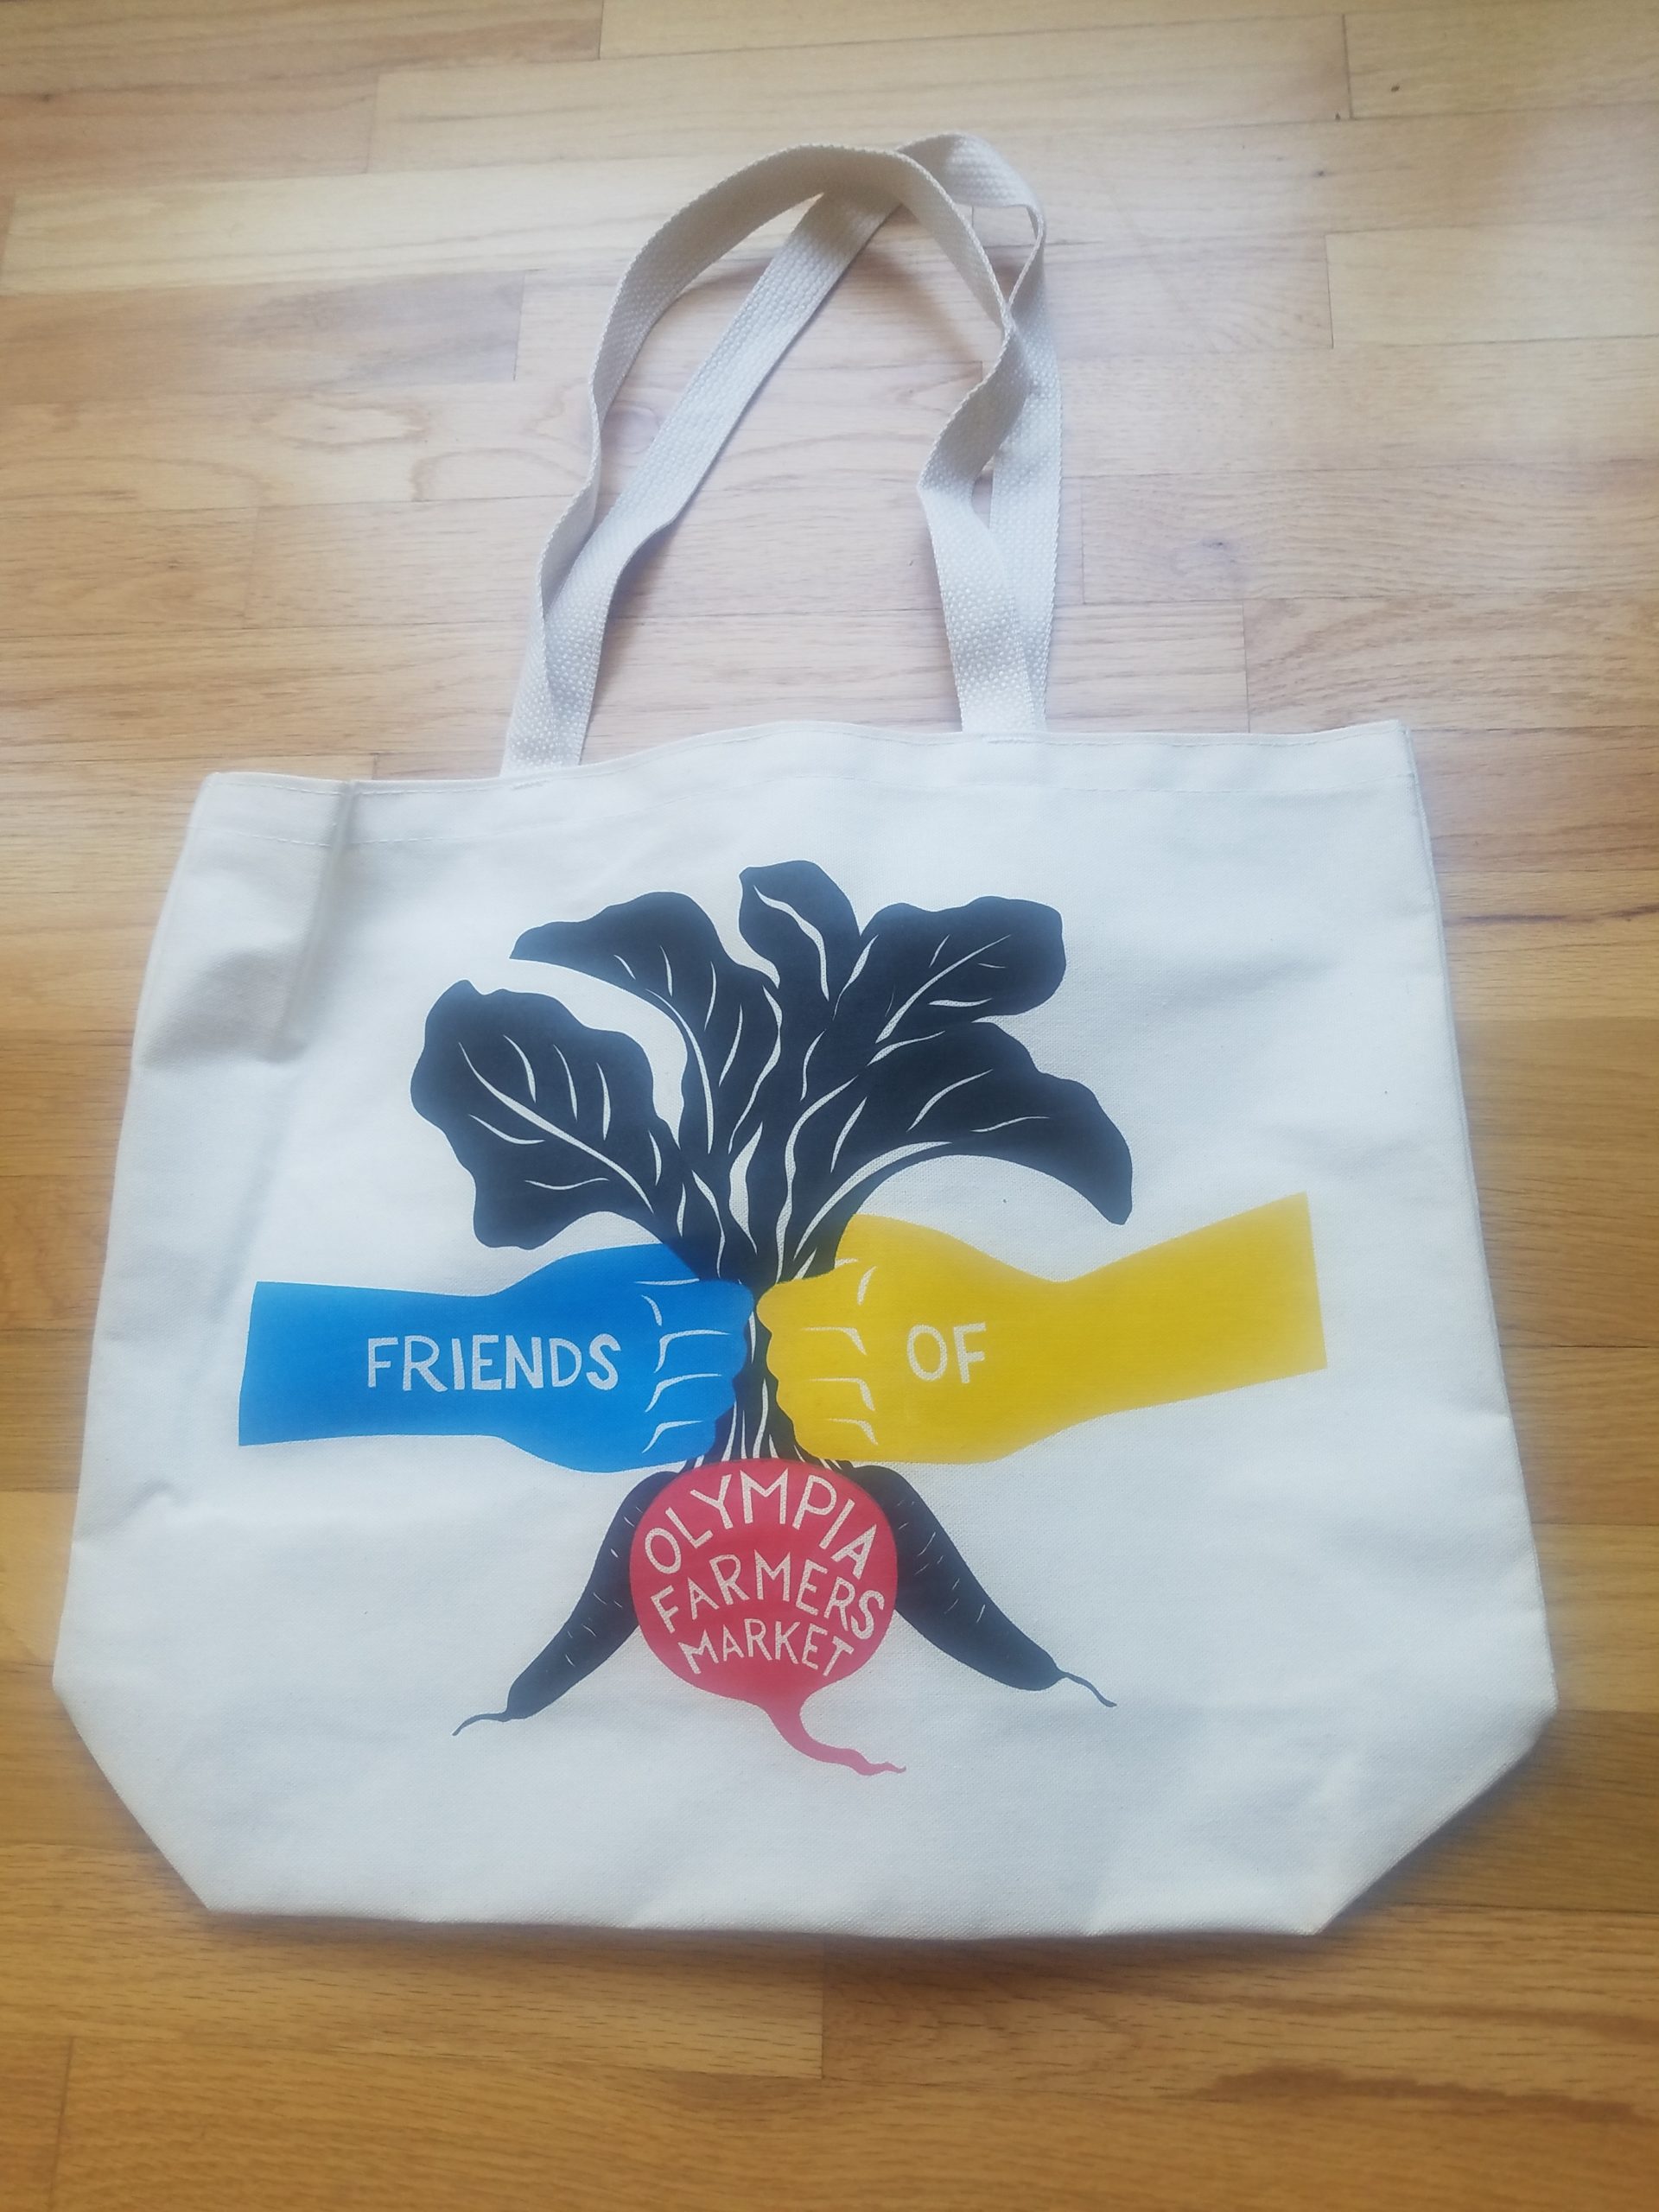 Tote Bags for sale in Nyssa, Oregon, Facebook Marketplace